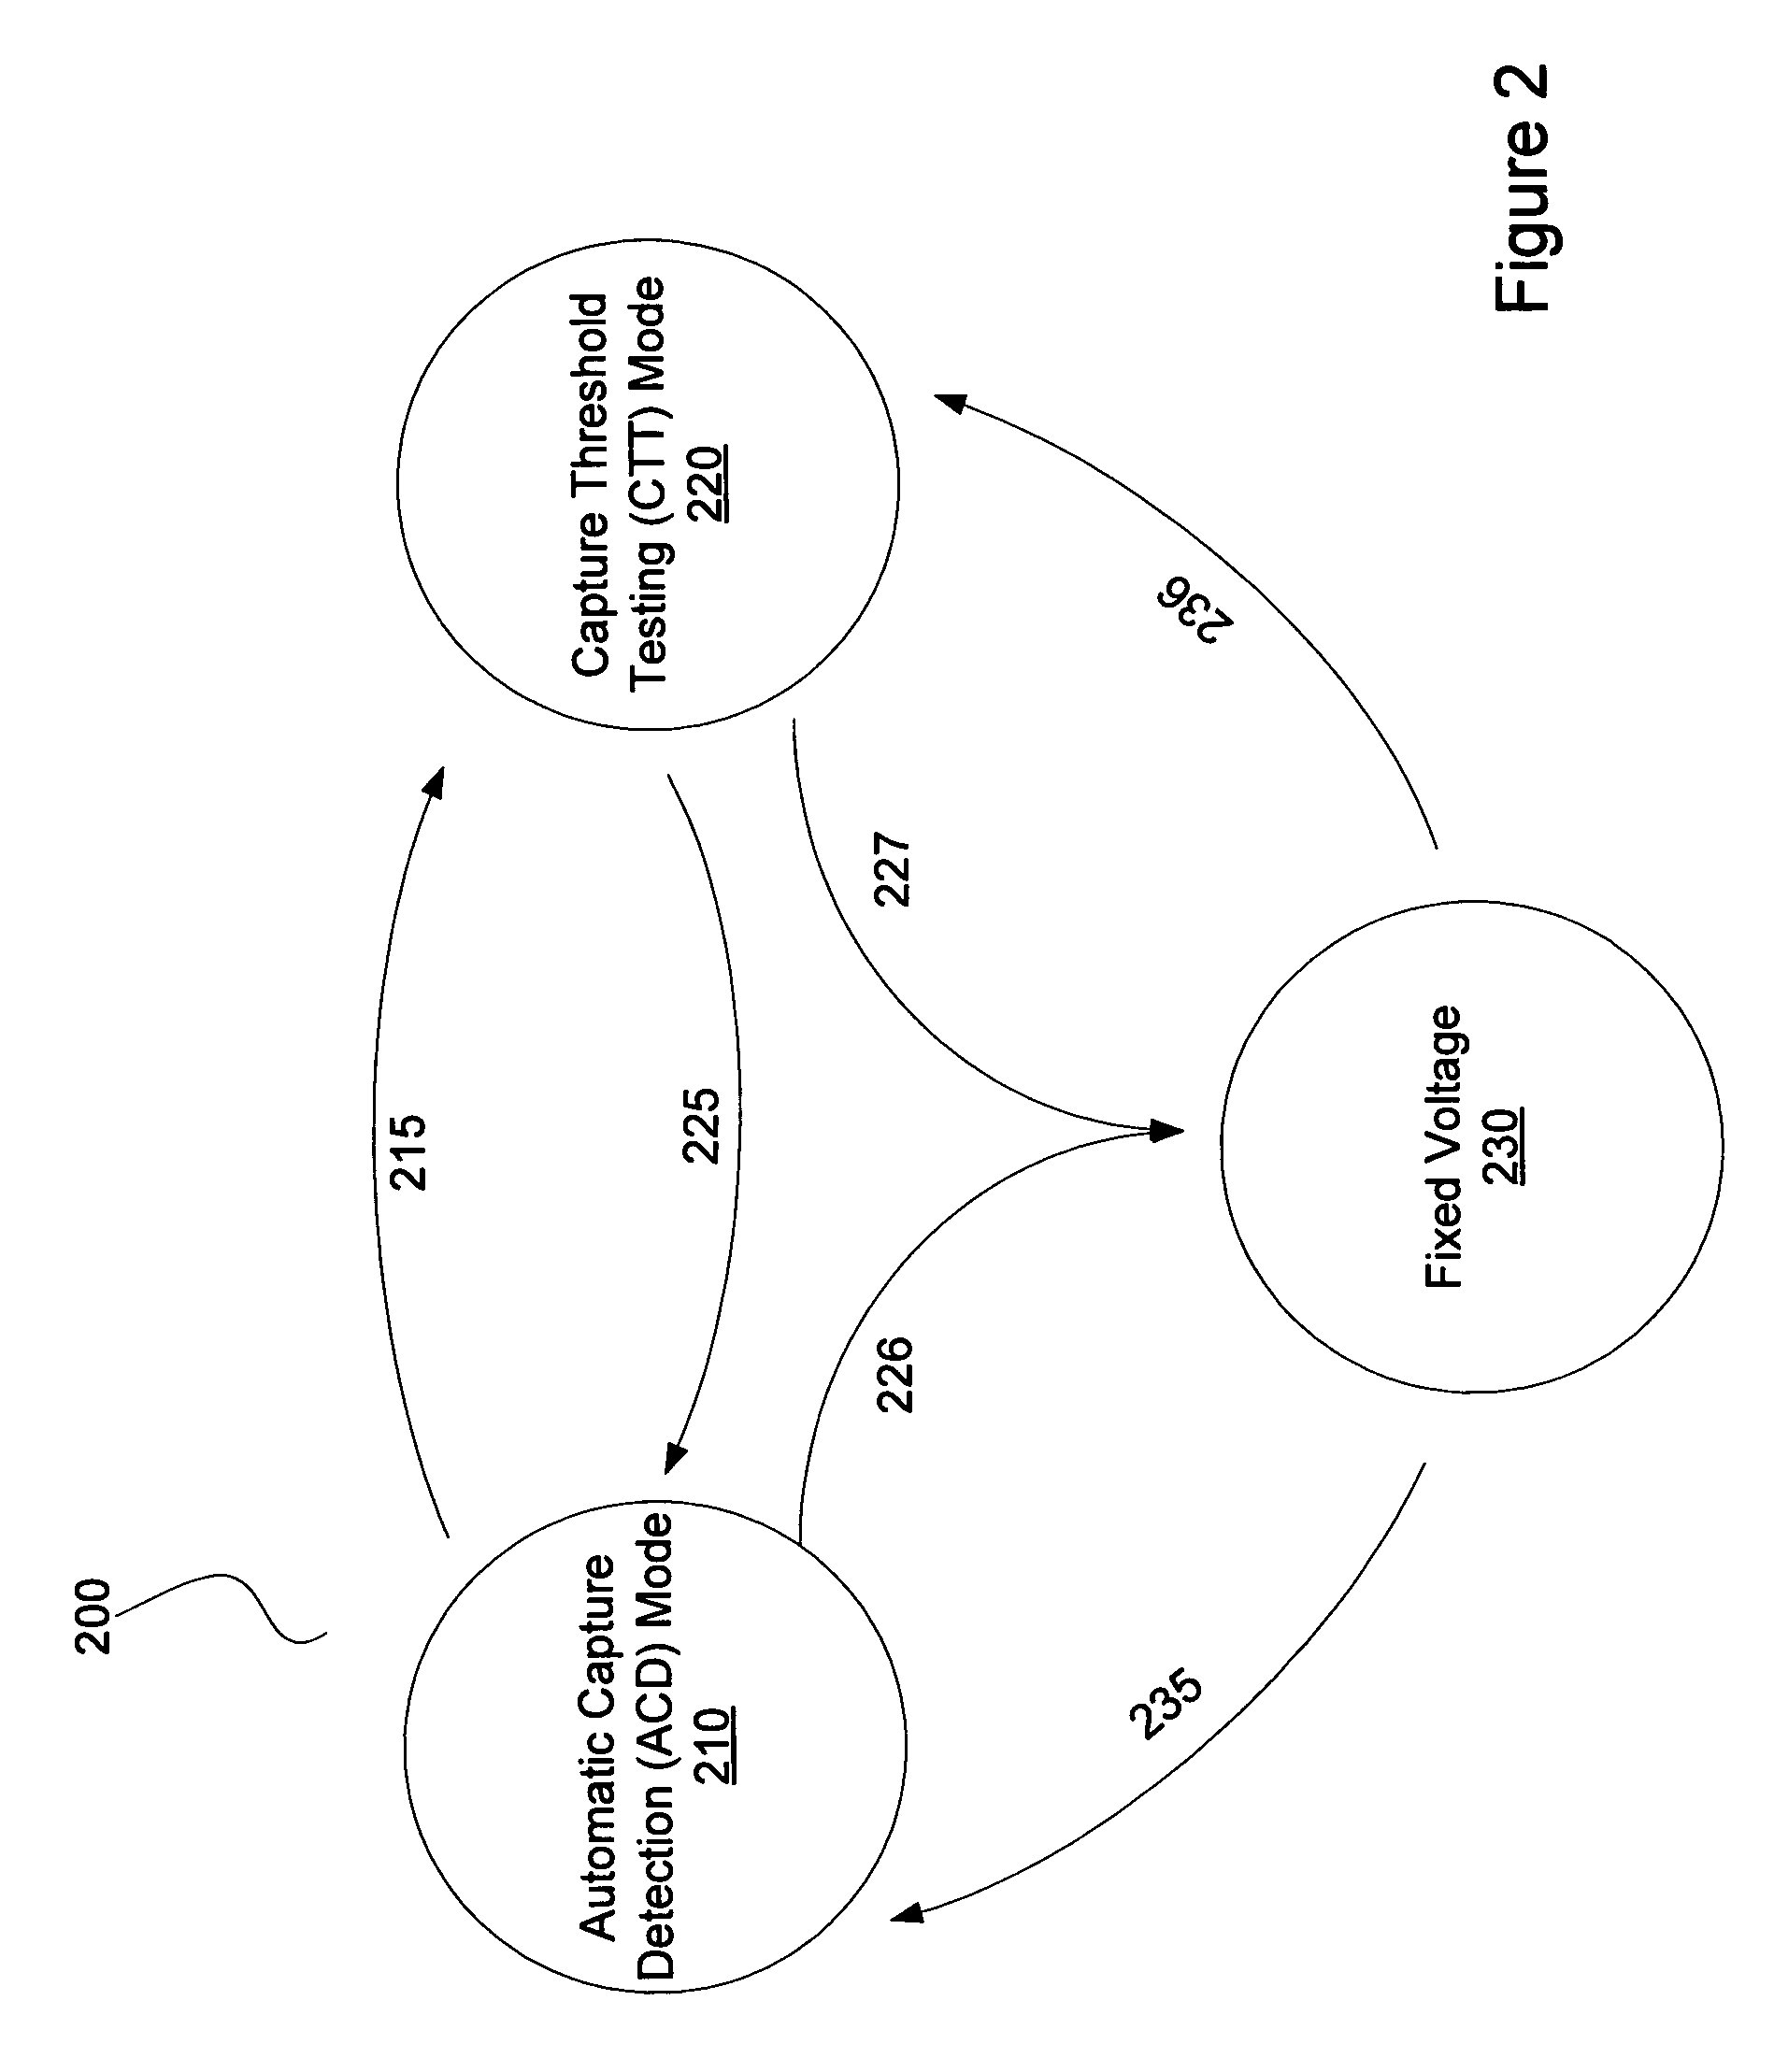 Methods and systems for selecting capture verification modes